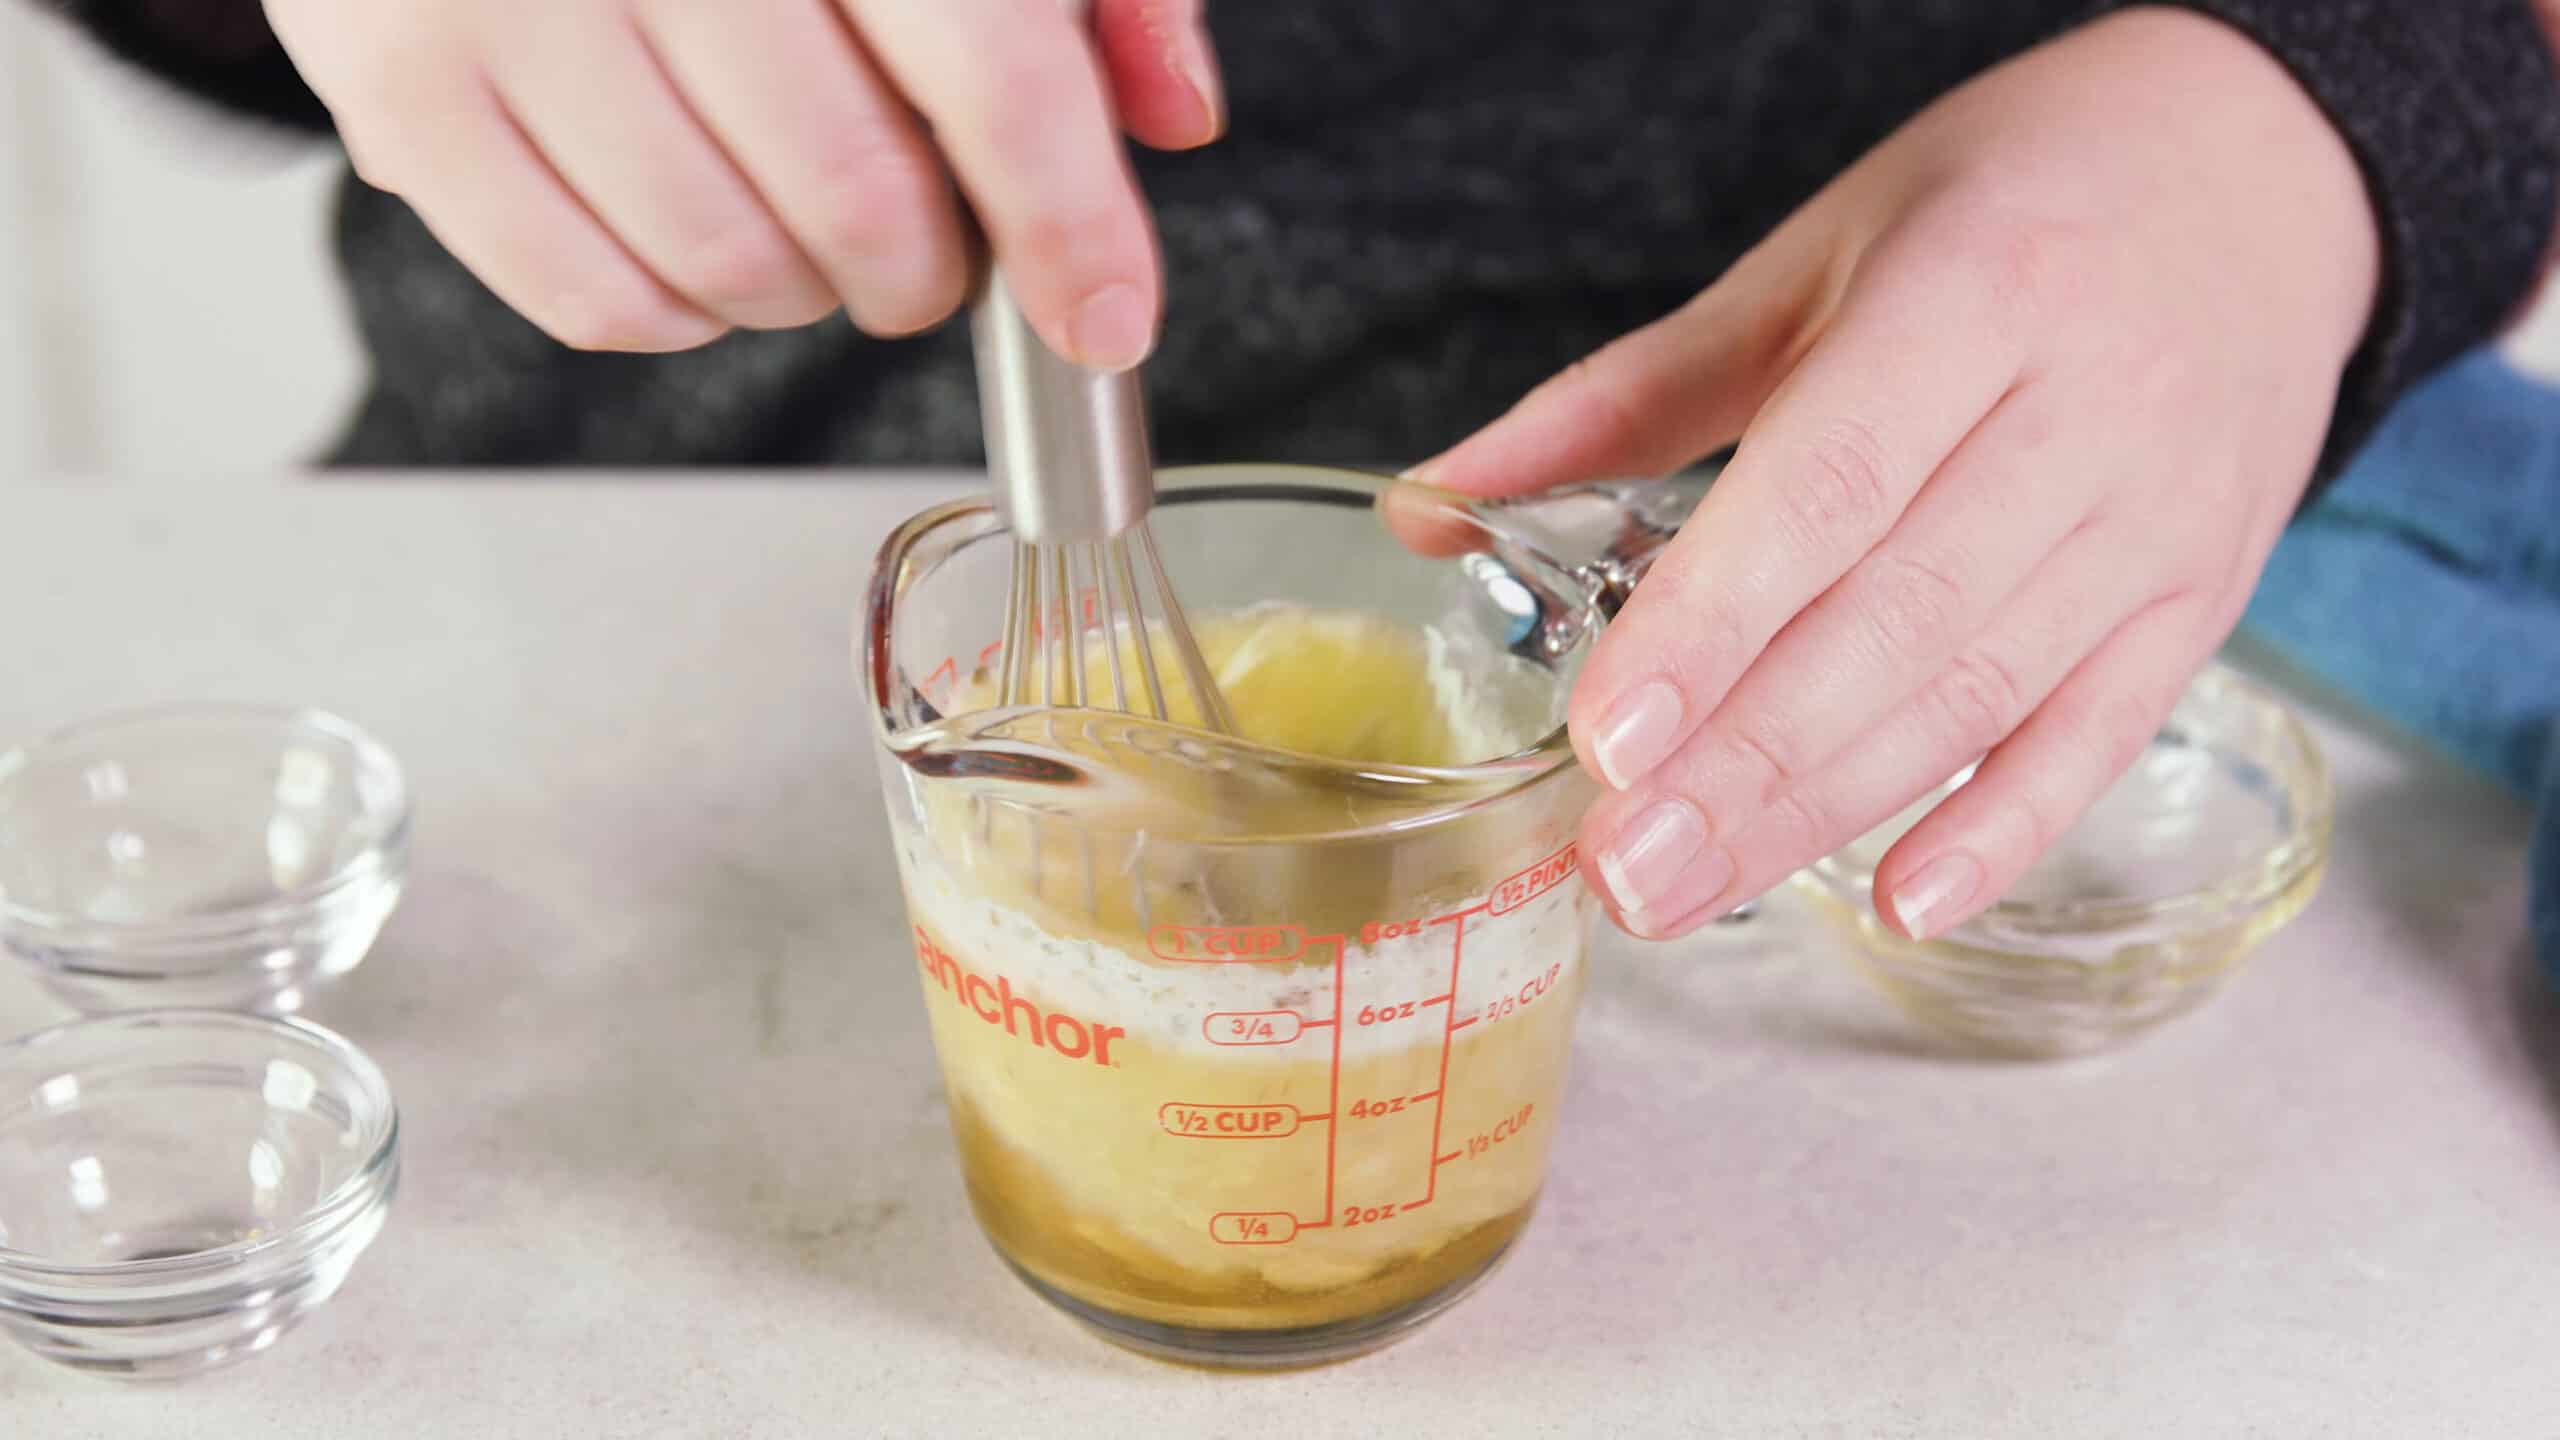 Angled view of clear glass measuring cup filled with melted butter and other ingredients for flavoring and a wire whisk mixing the ingredients together.